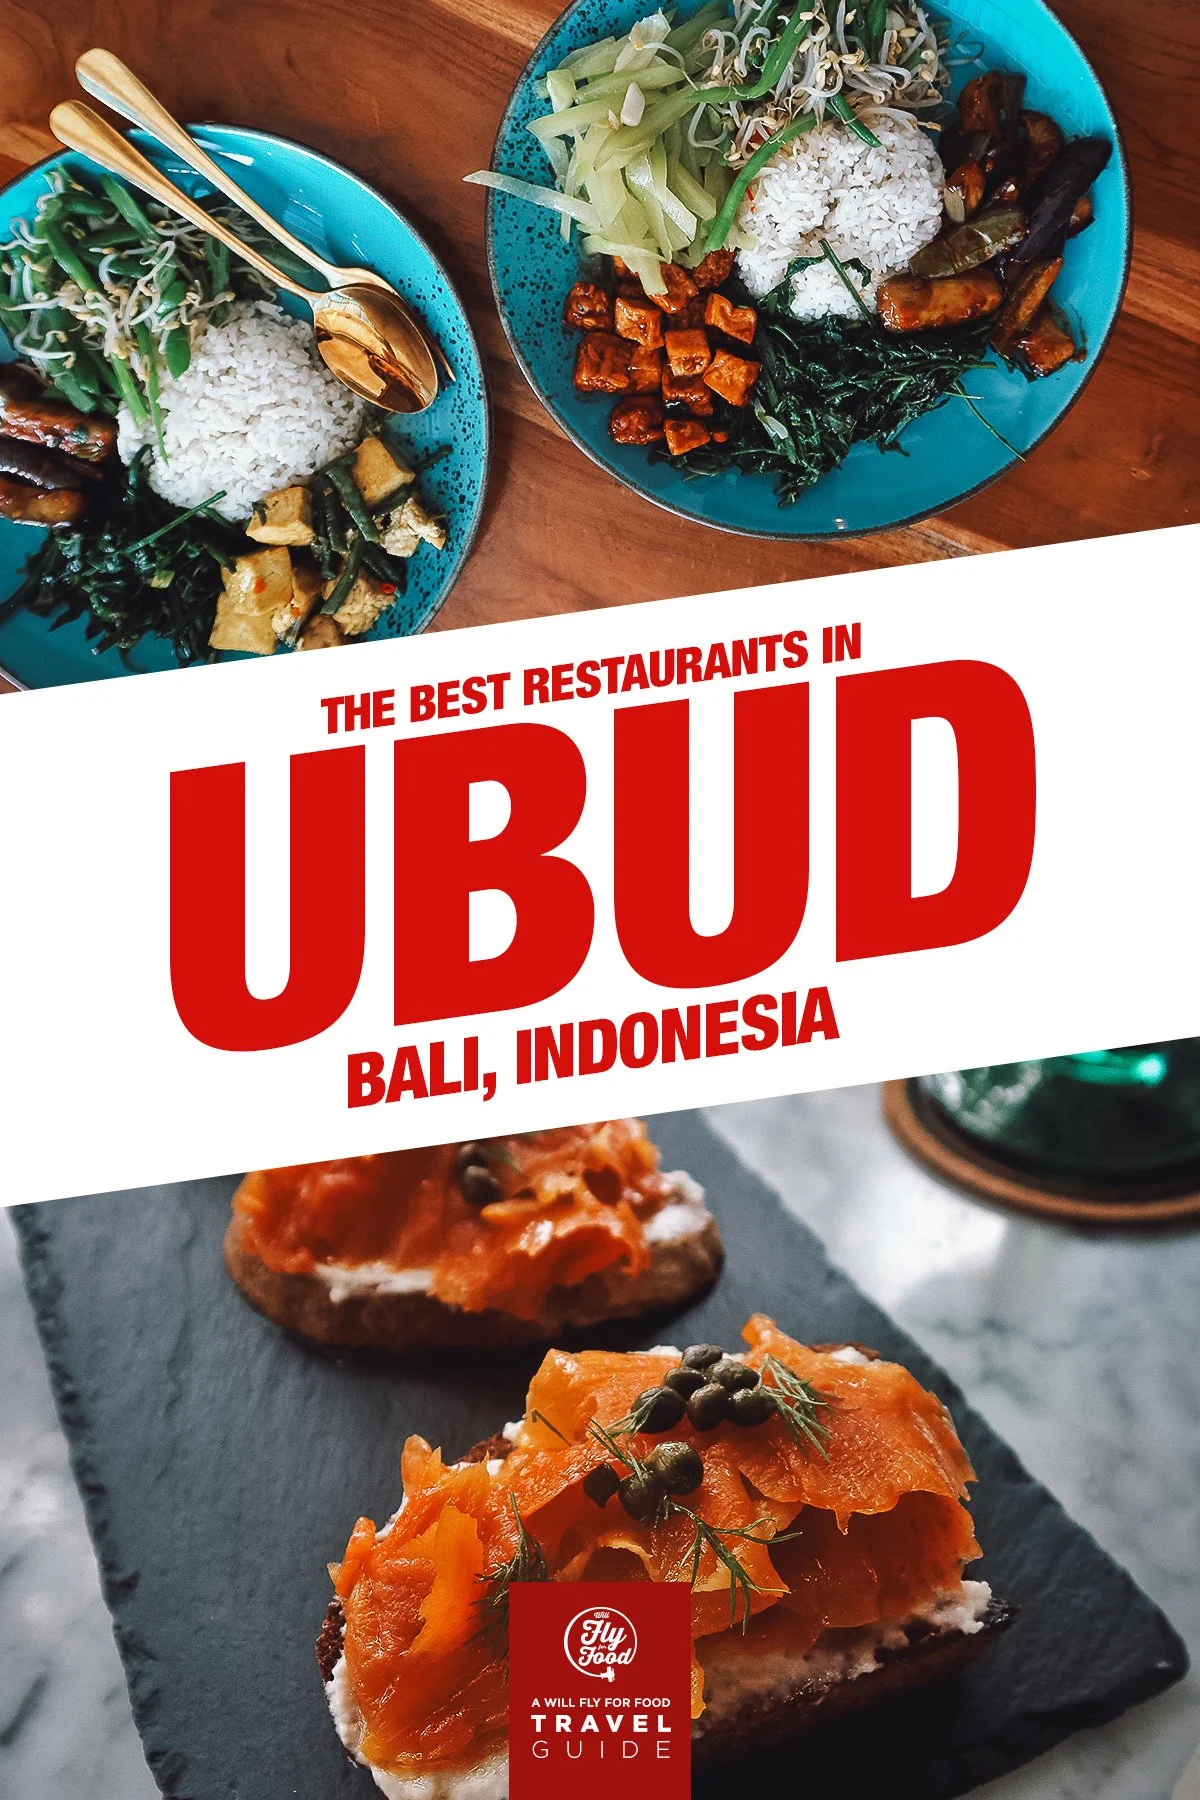 Dishes from restaurants in Ubud, Bali, Indonesia